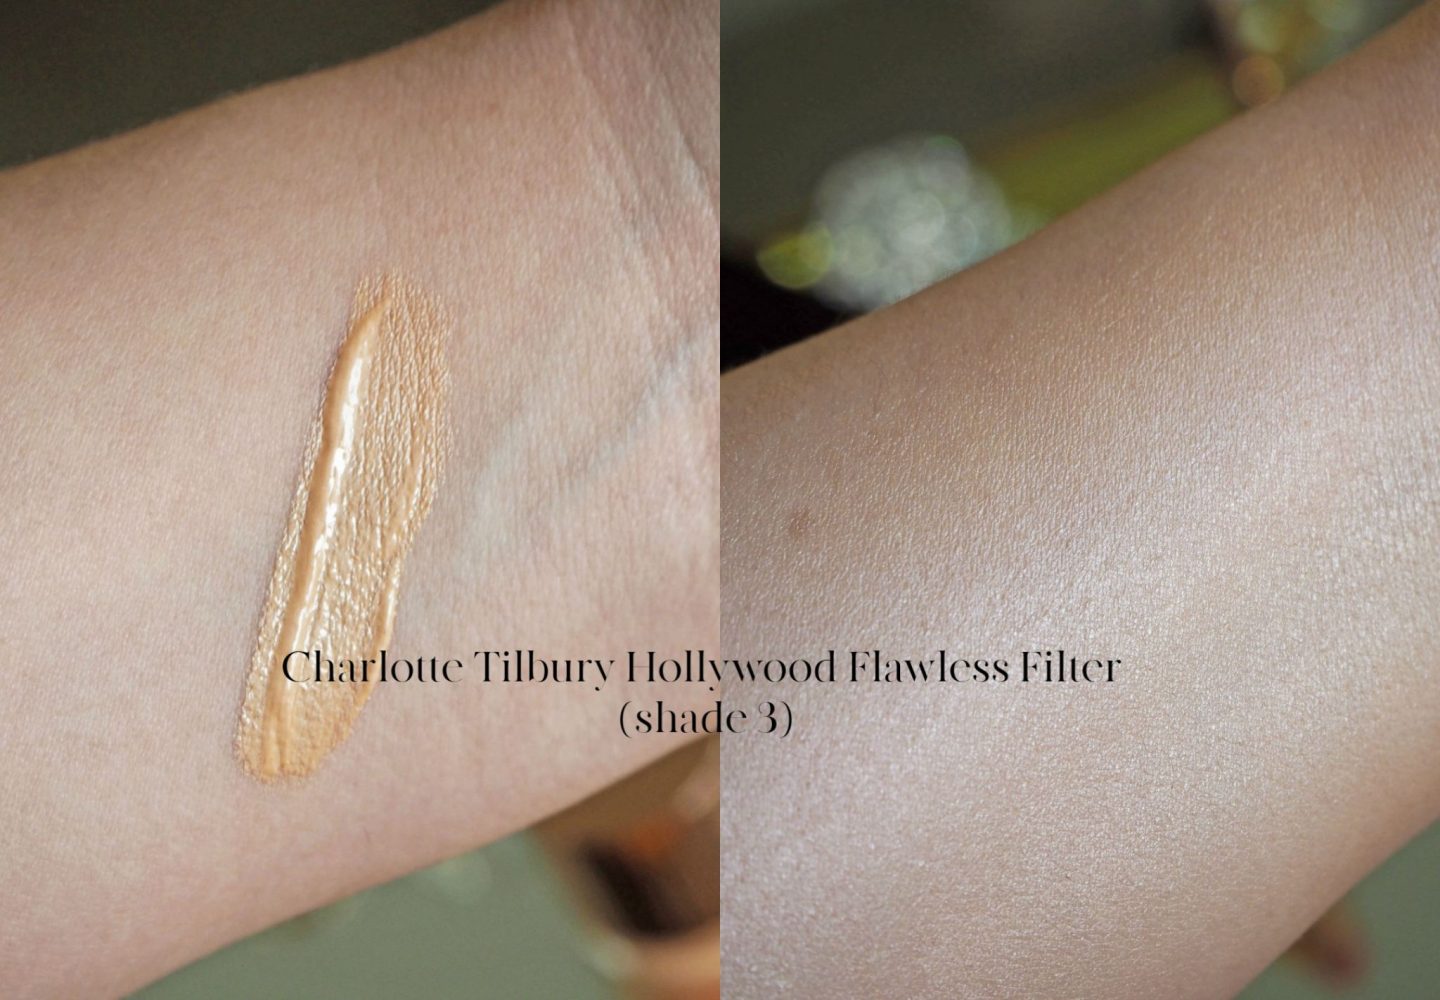 Charlotte Tilbury Hollywood Flawless Filter shade 3 swatches